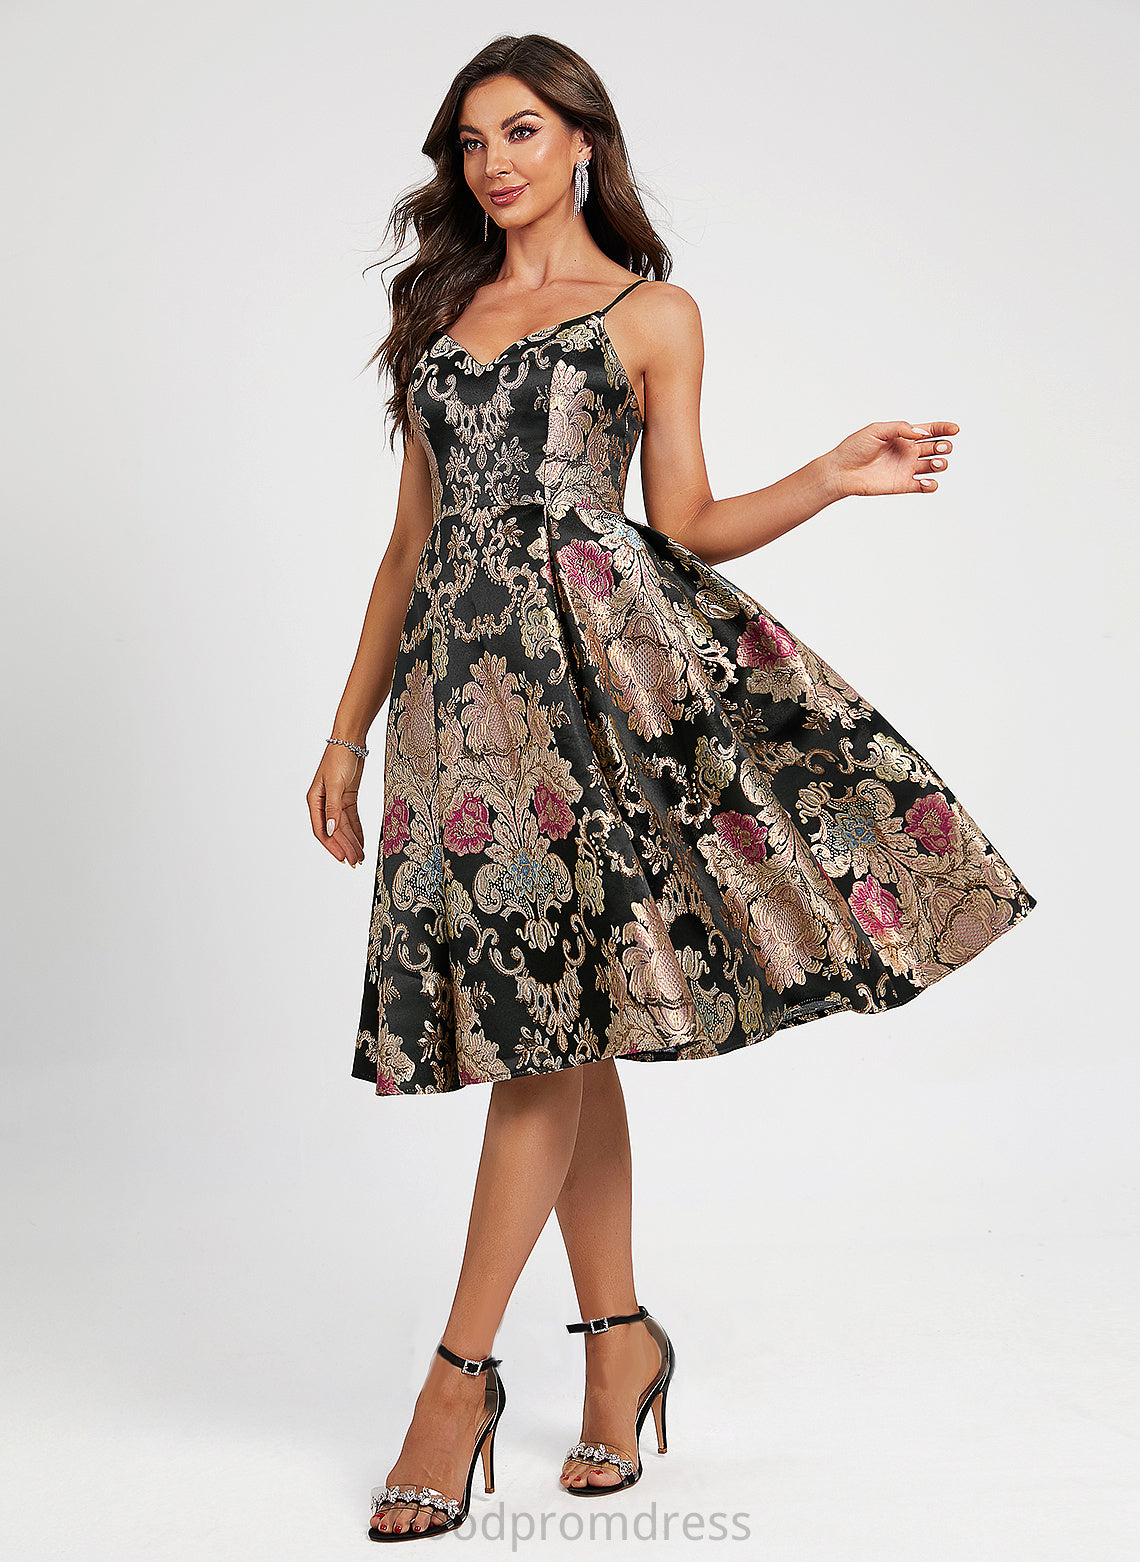 A-Line Homecoming Dresses Bridget Knee-Length V-neck Dress Lace Flower(s) Homecoming With